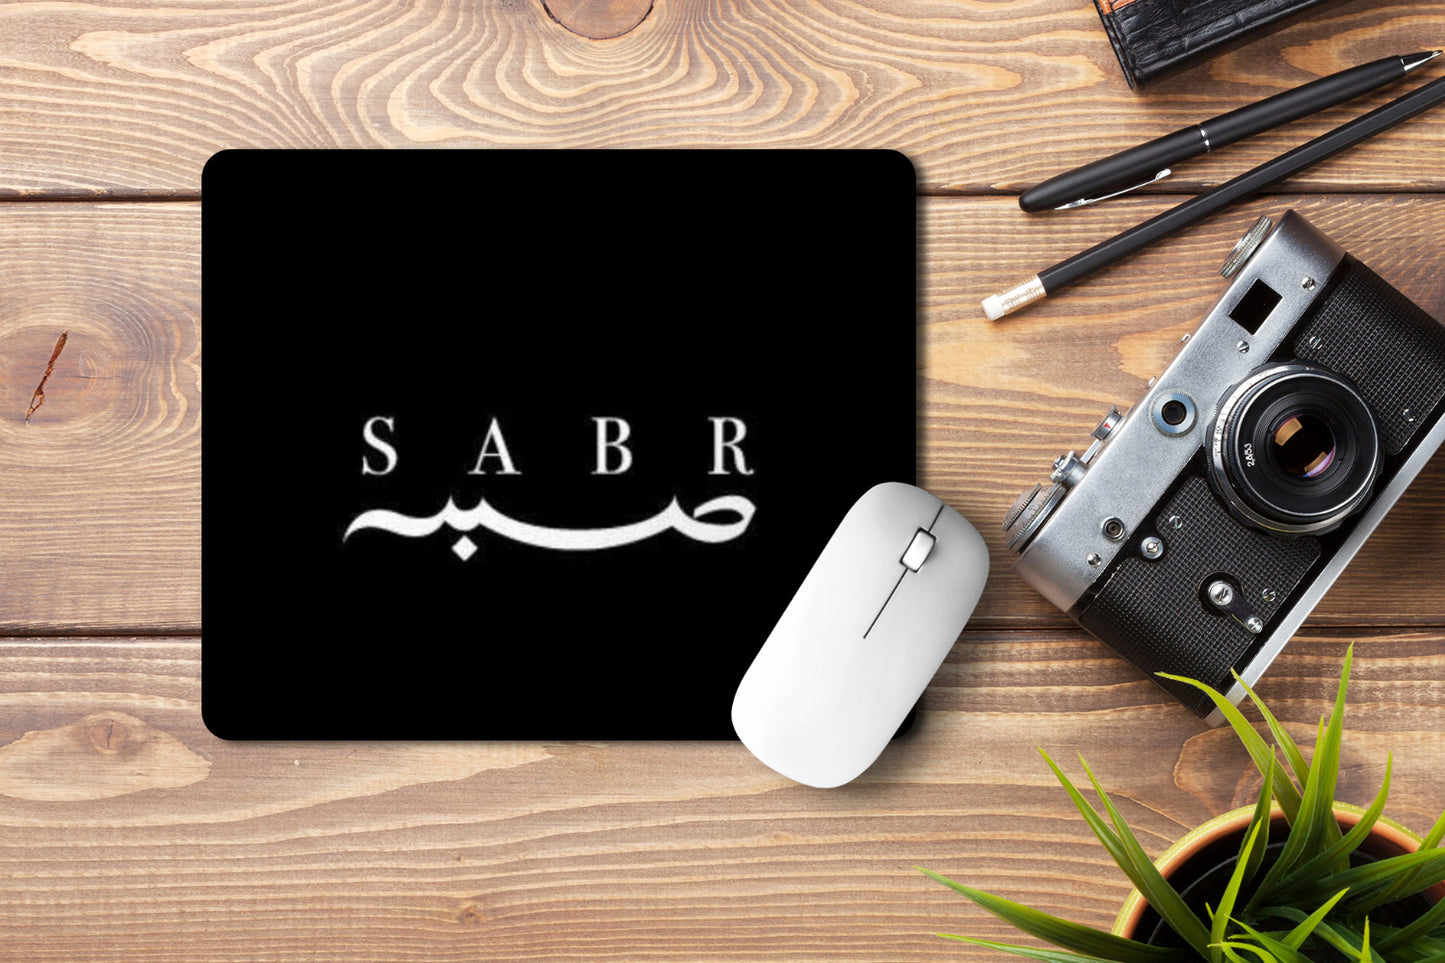 Sabr' Printed Non-Slip Rubber Base Mouse Pad for Laptop, PC, Computer